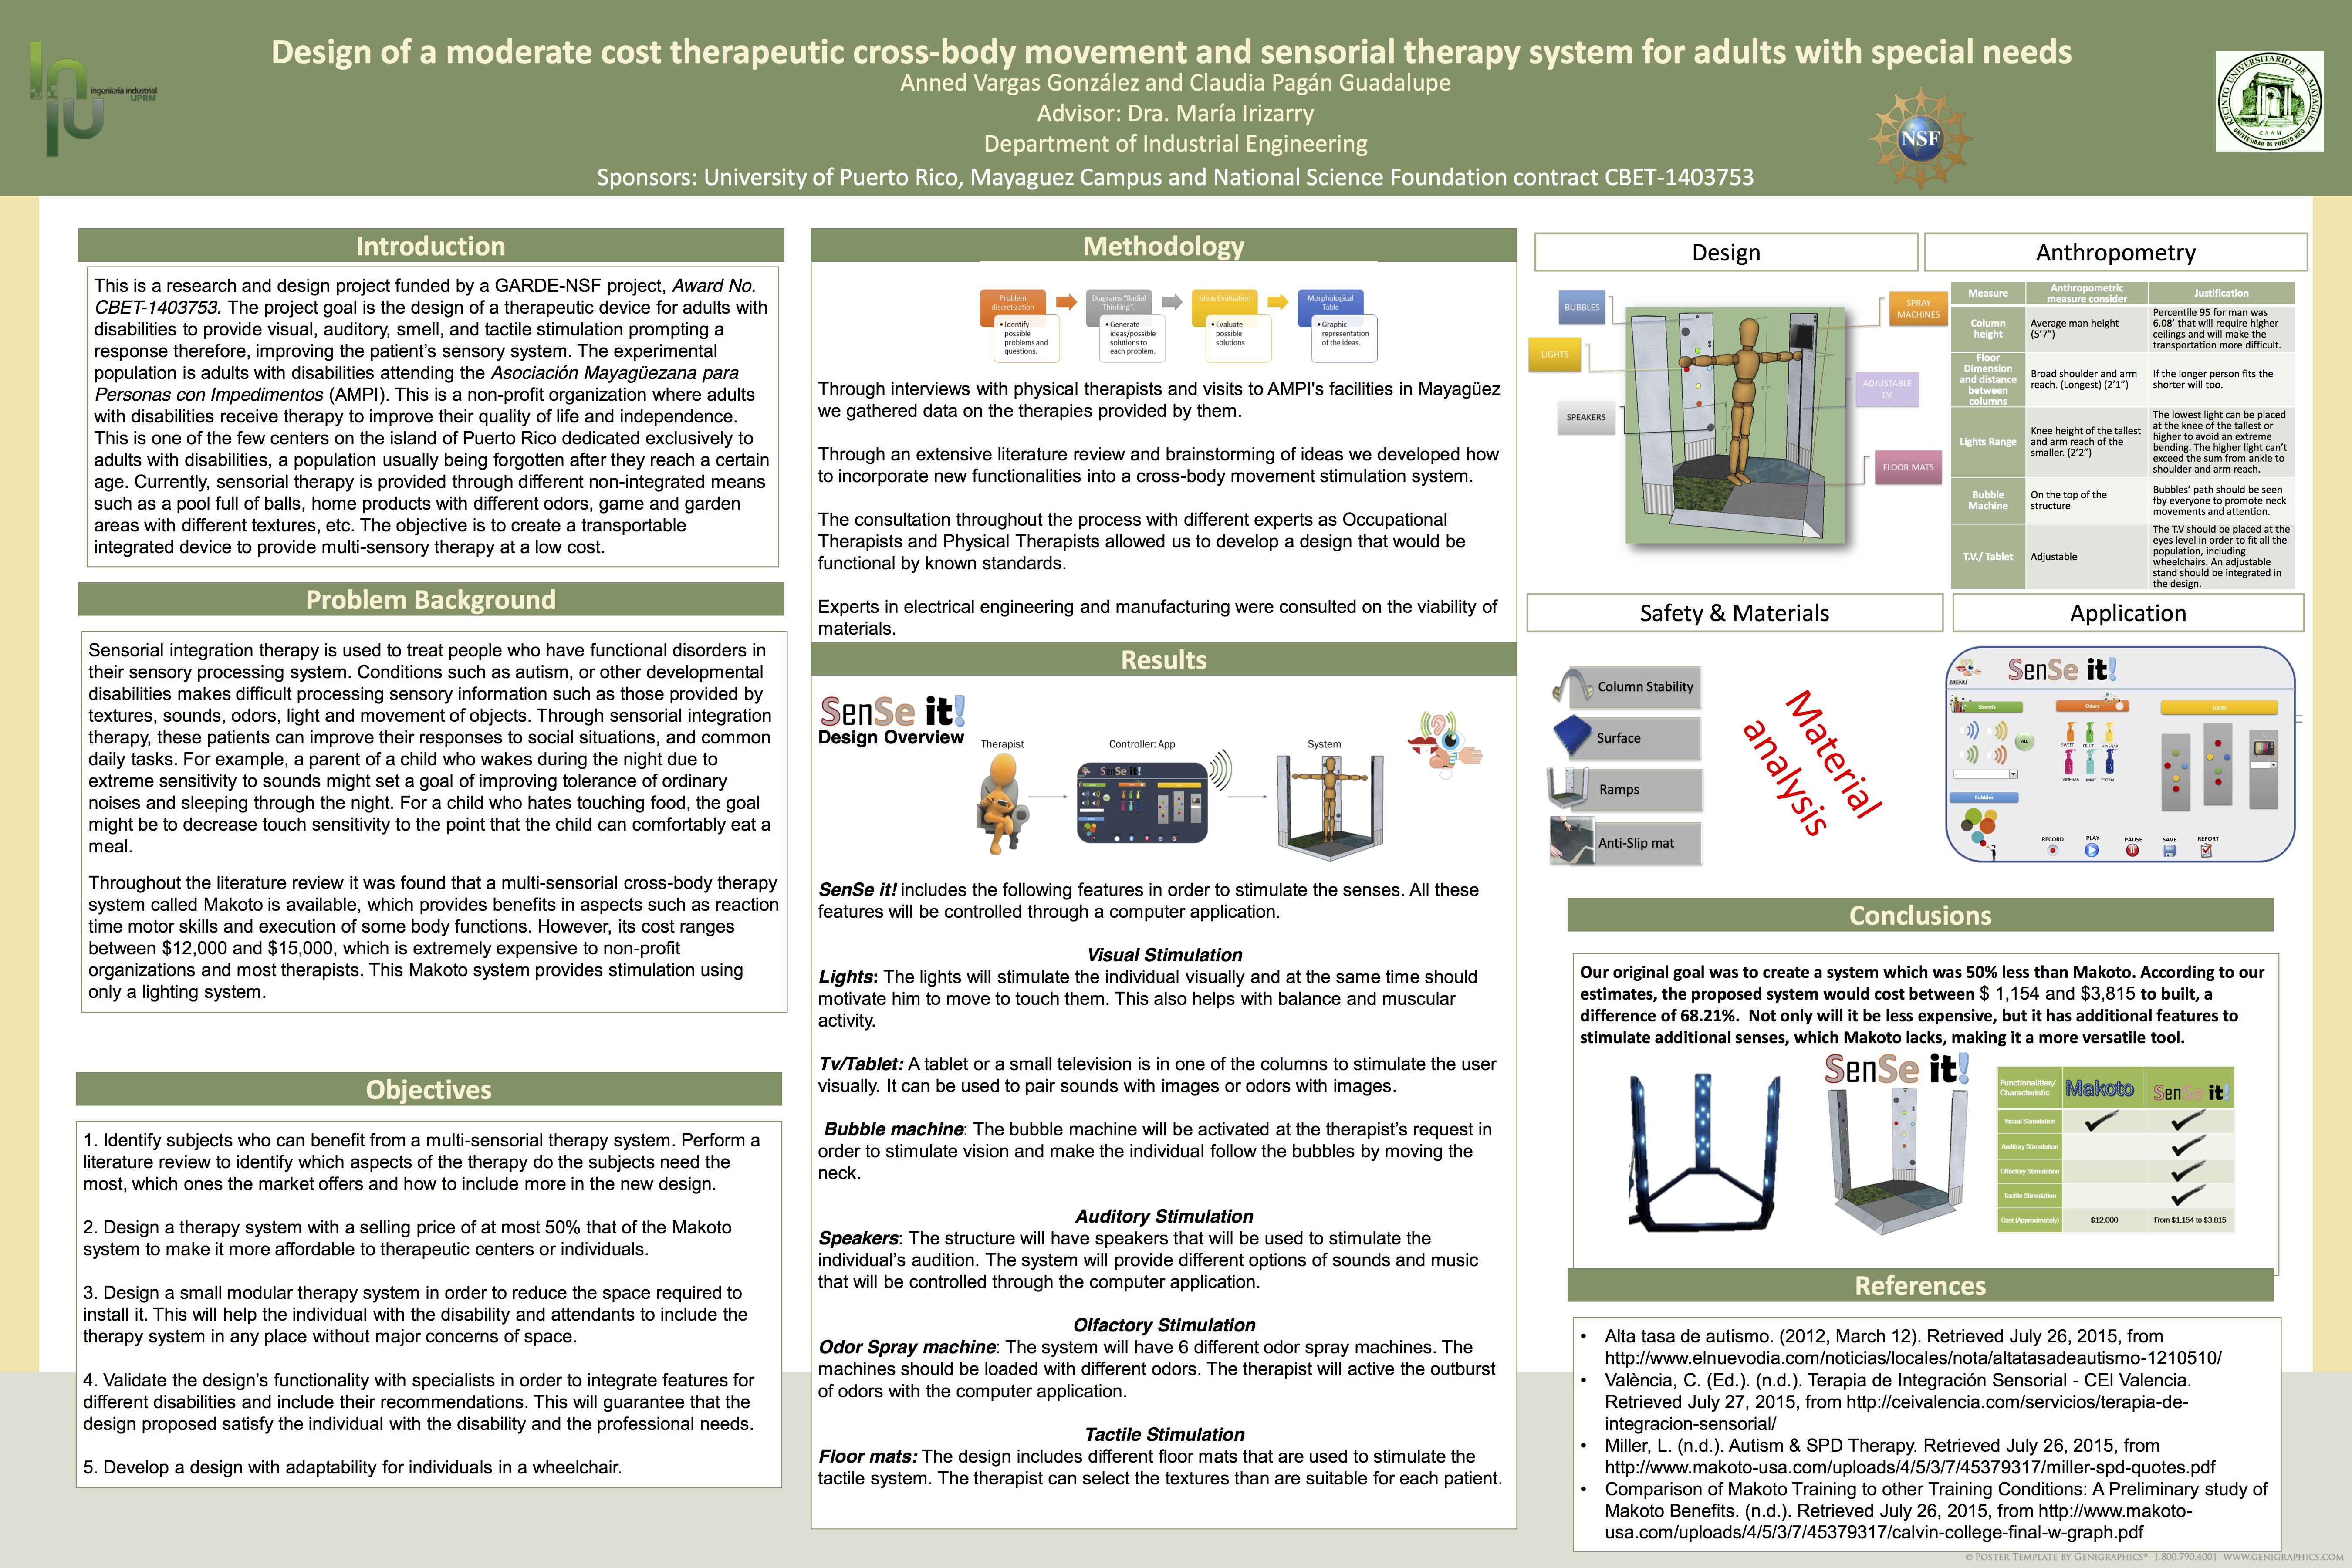 Design of a cost-effective therapeutic cross-body movement and sensorial therapy system for adults with special needs (poster)